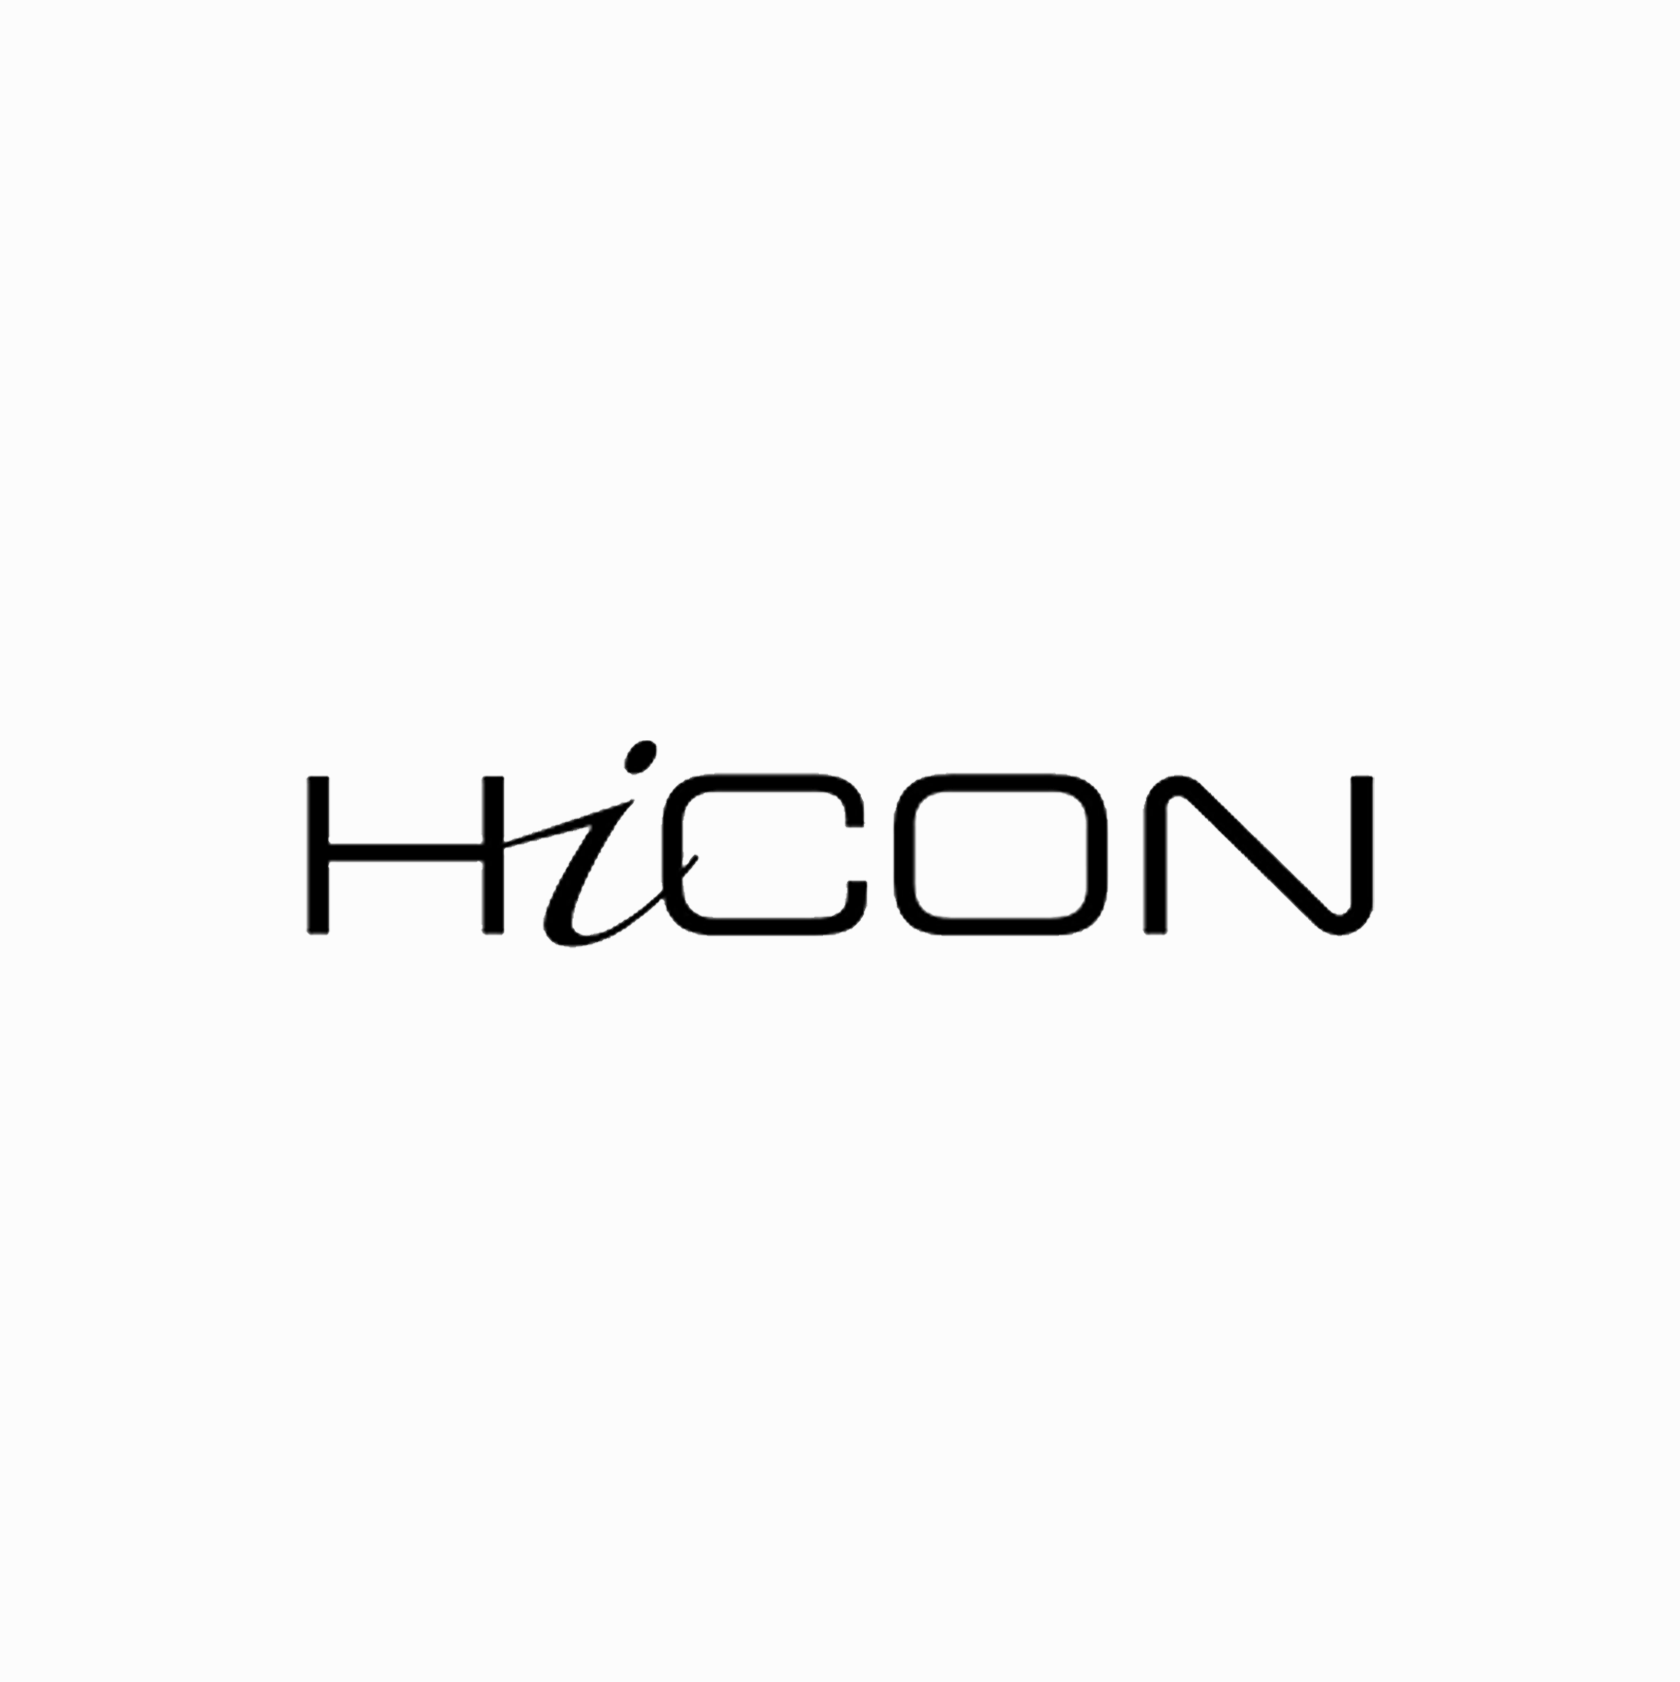 HICON.png